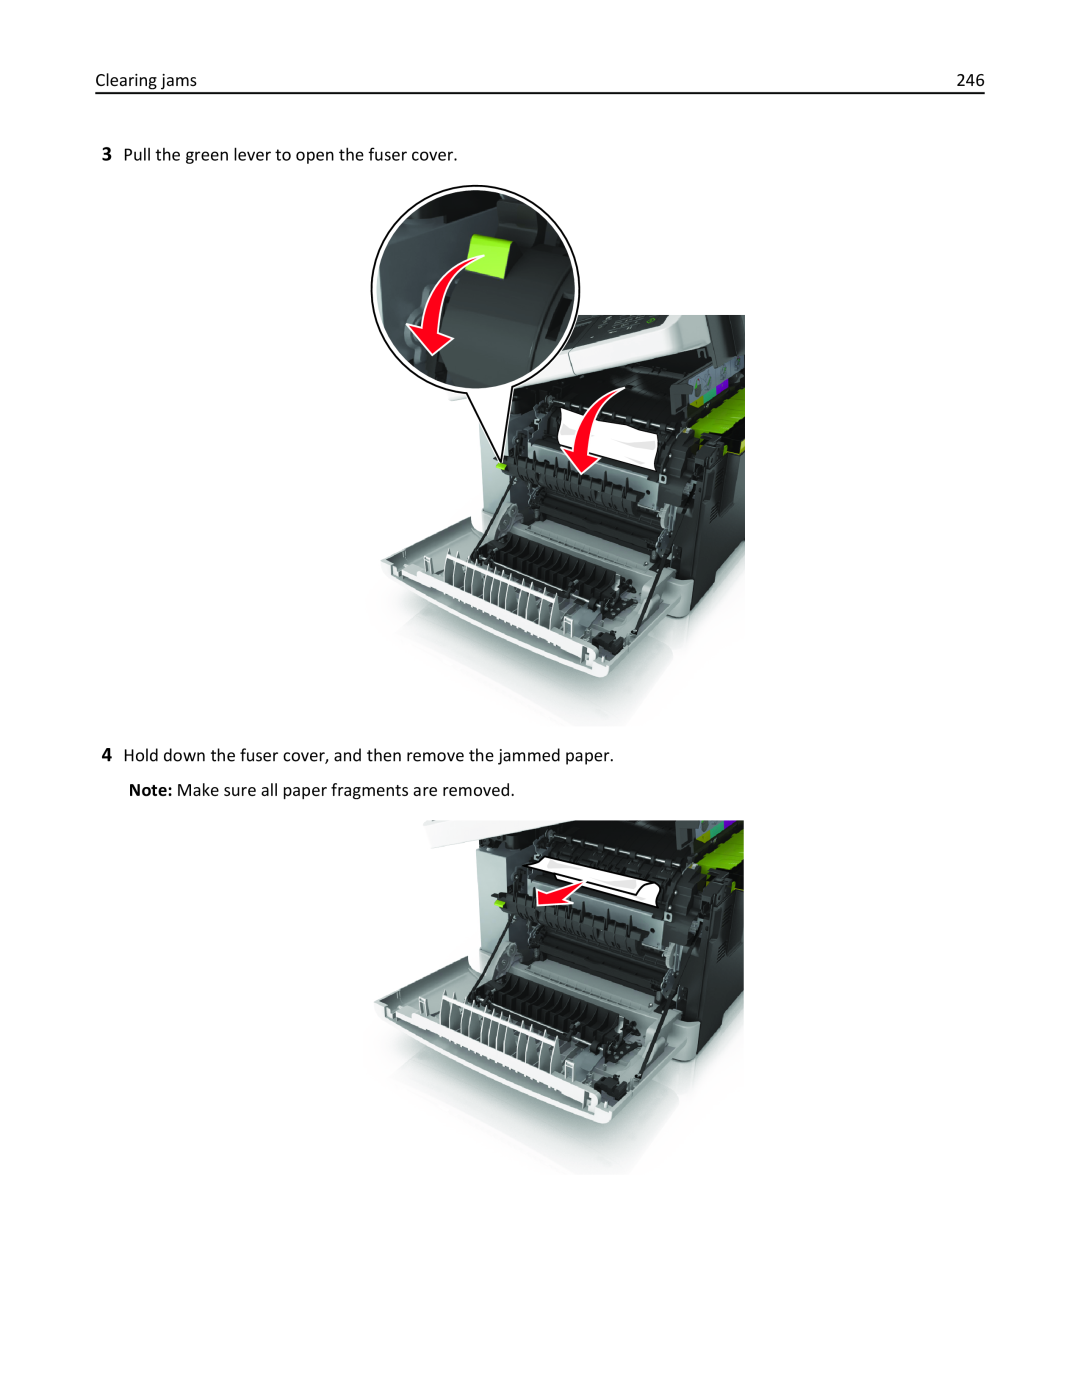 Lexmark 436 manual Clearing jams, Pull the green lever to open the fuser cover 